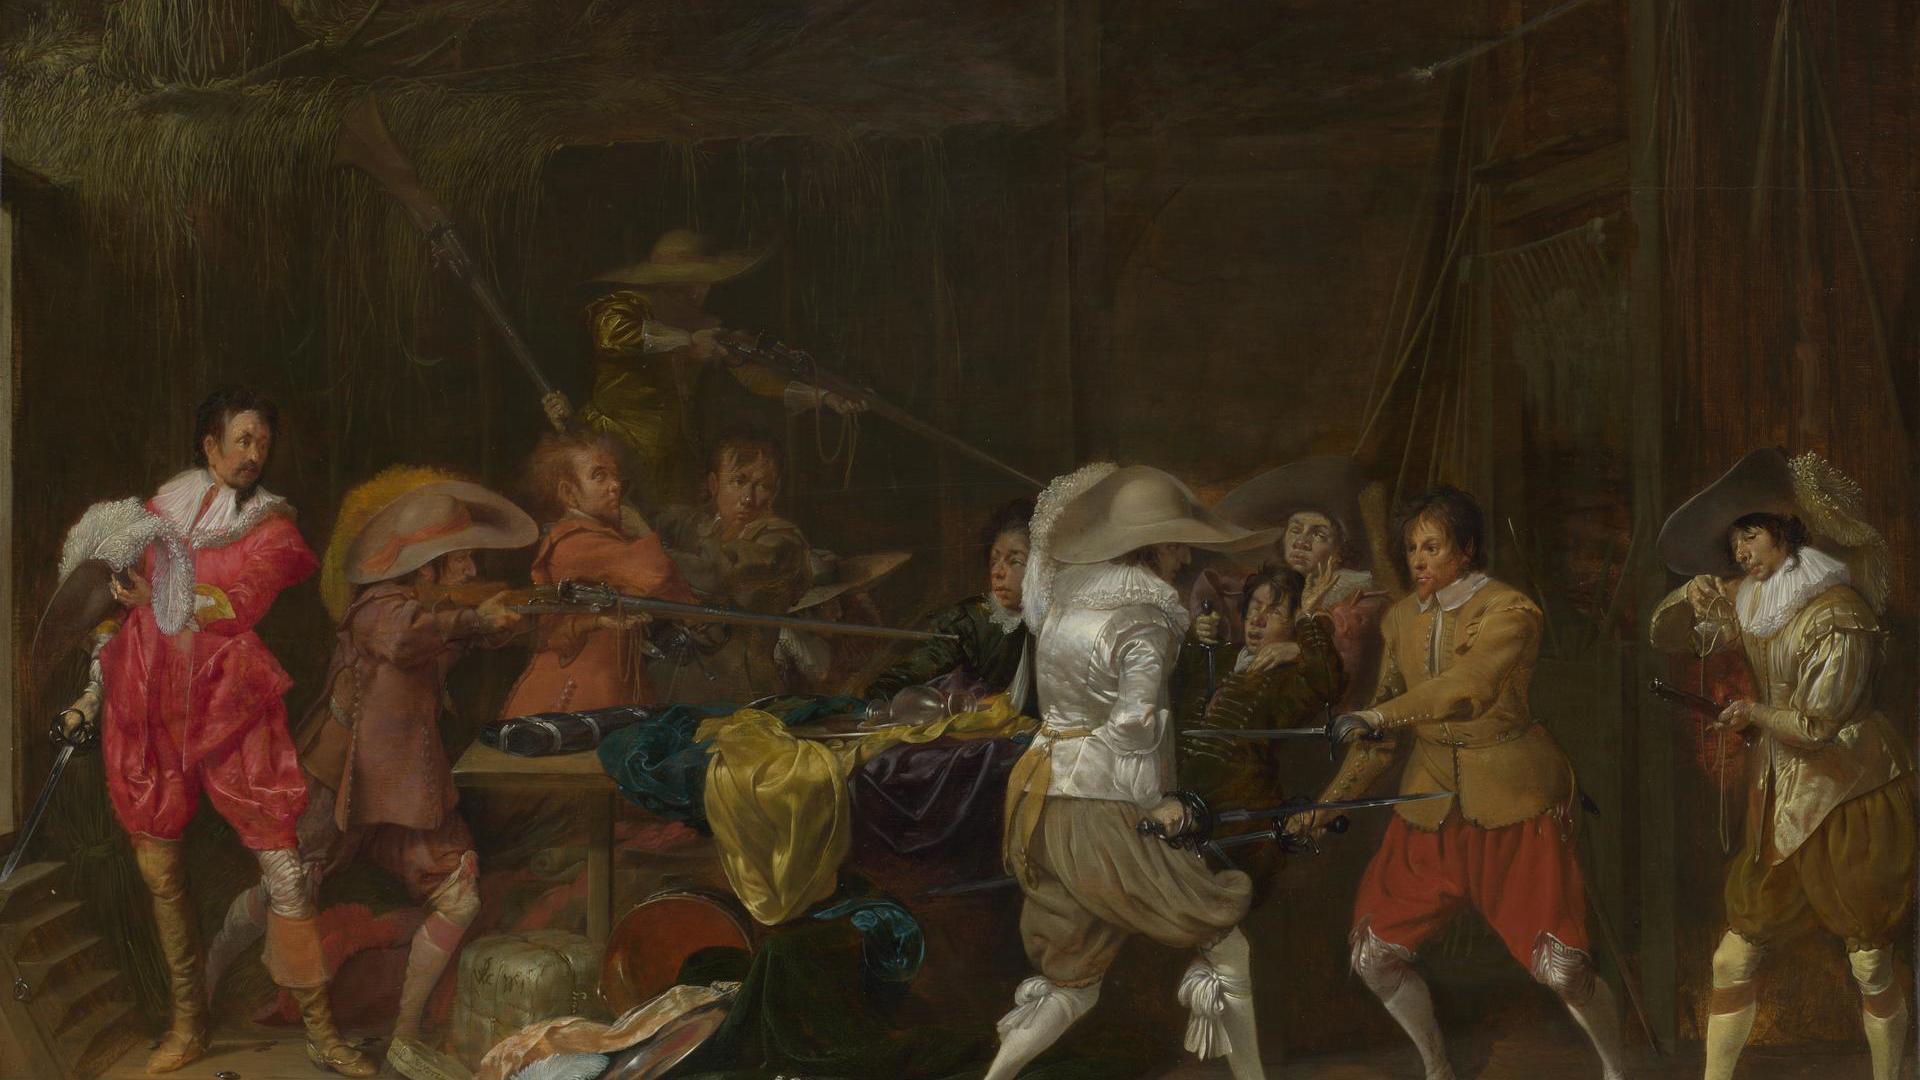 Soldiers fighting over Booty in a Barn by Willem Duyster